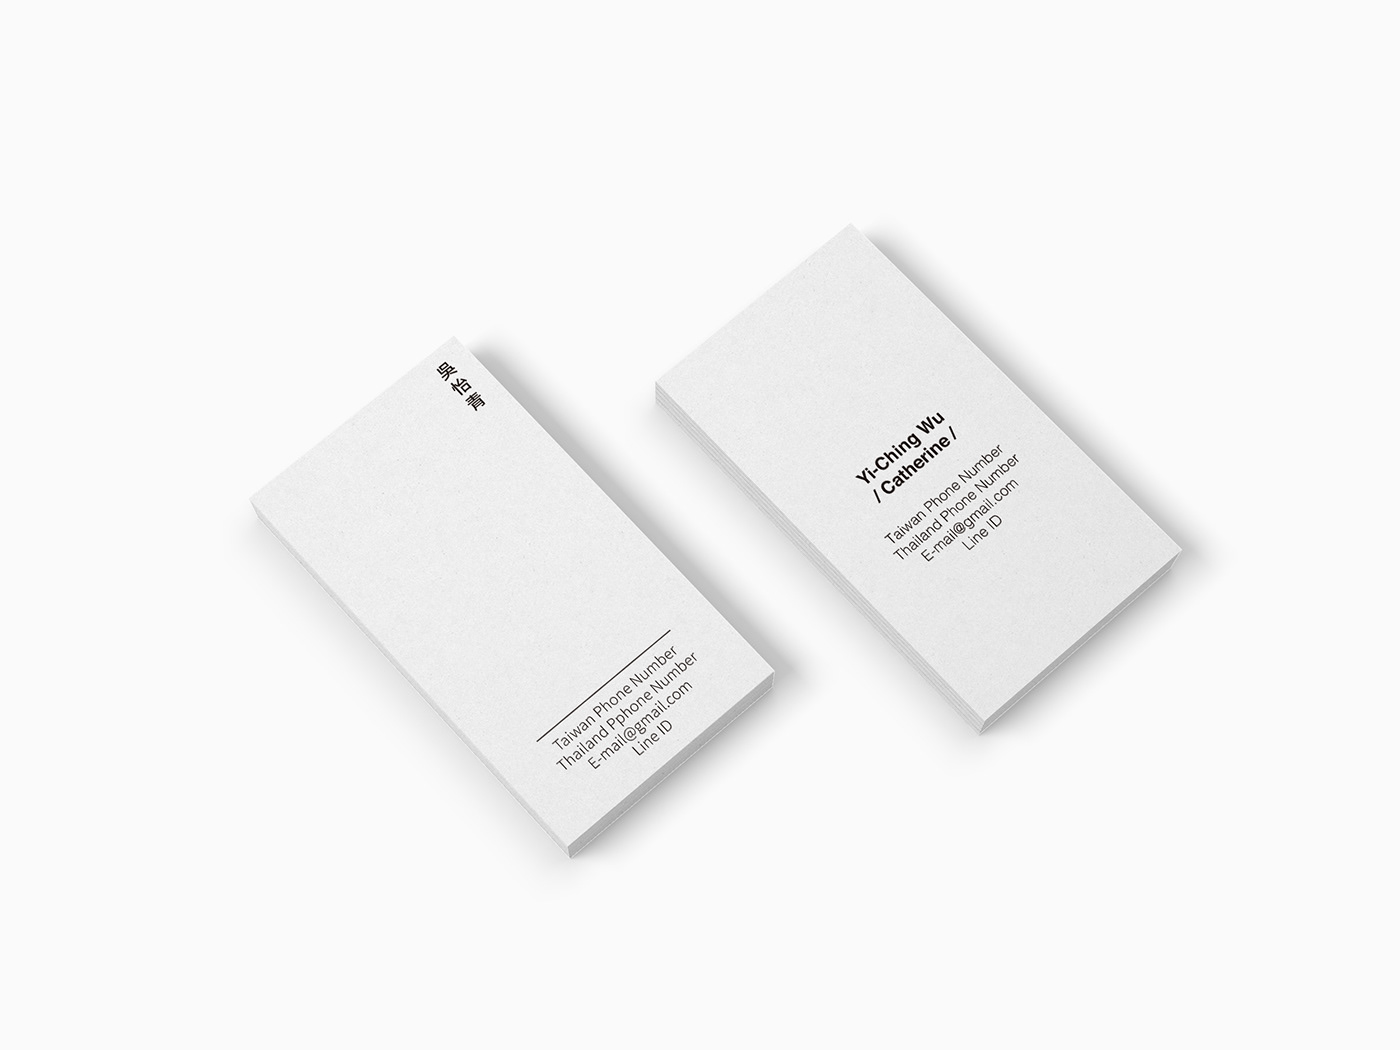 Name card bussiness card White less is more japanese Style paper card 윈벳 軟裝設計